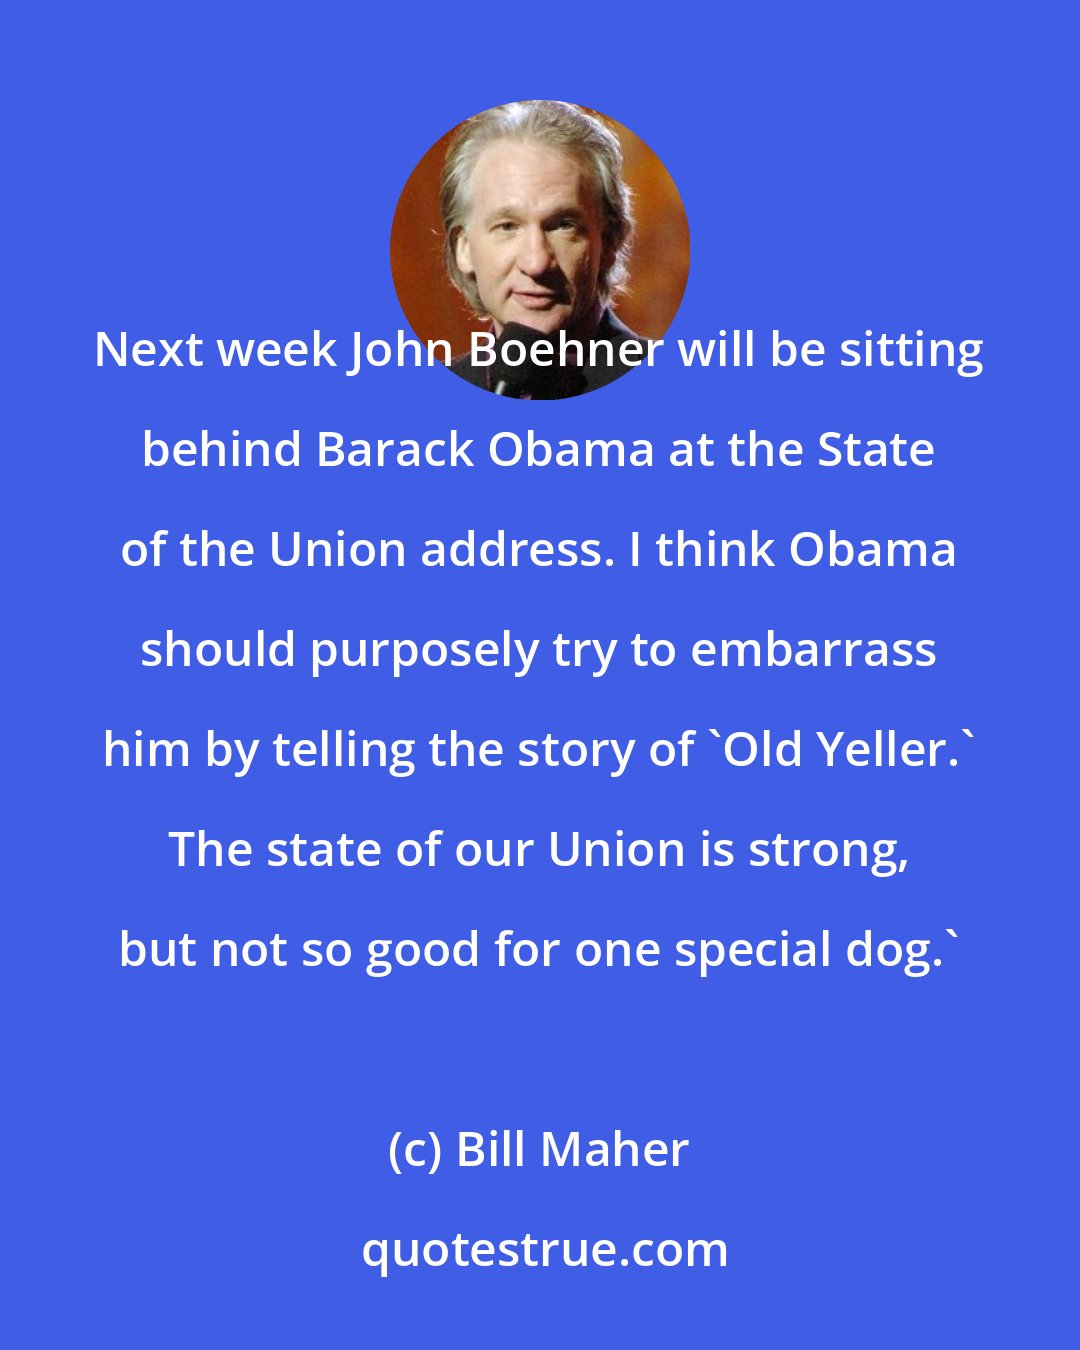 Bill Maher: Next week John Boehner will be sitting behind Barack Obama at the State of the Union address. I think Obama should purposely try to embarrass him by telling the story of 'Old Yeller.' The state of our Union is strong, but not so good for one special dog.'